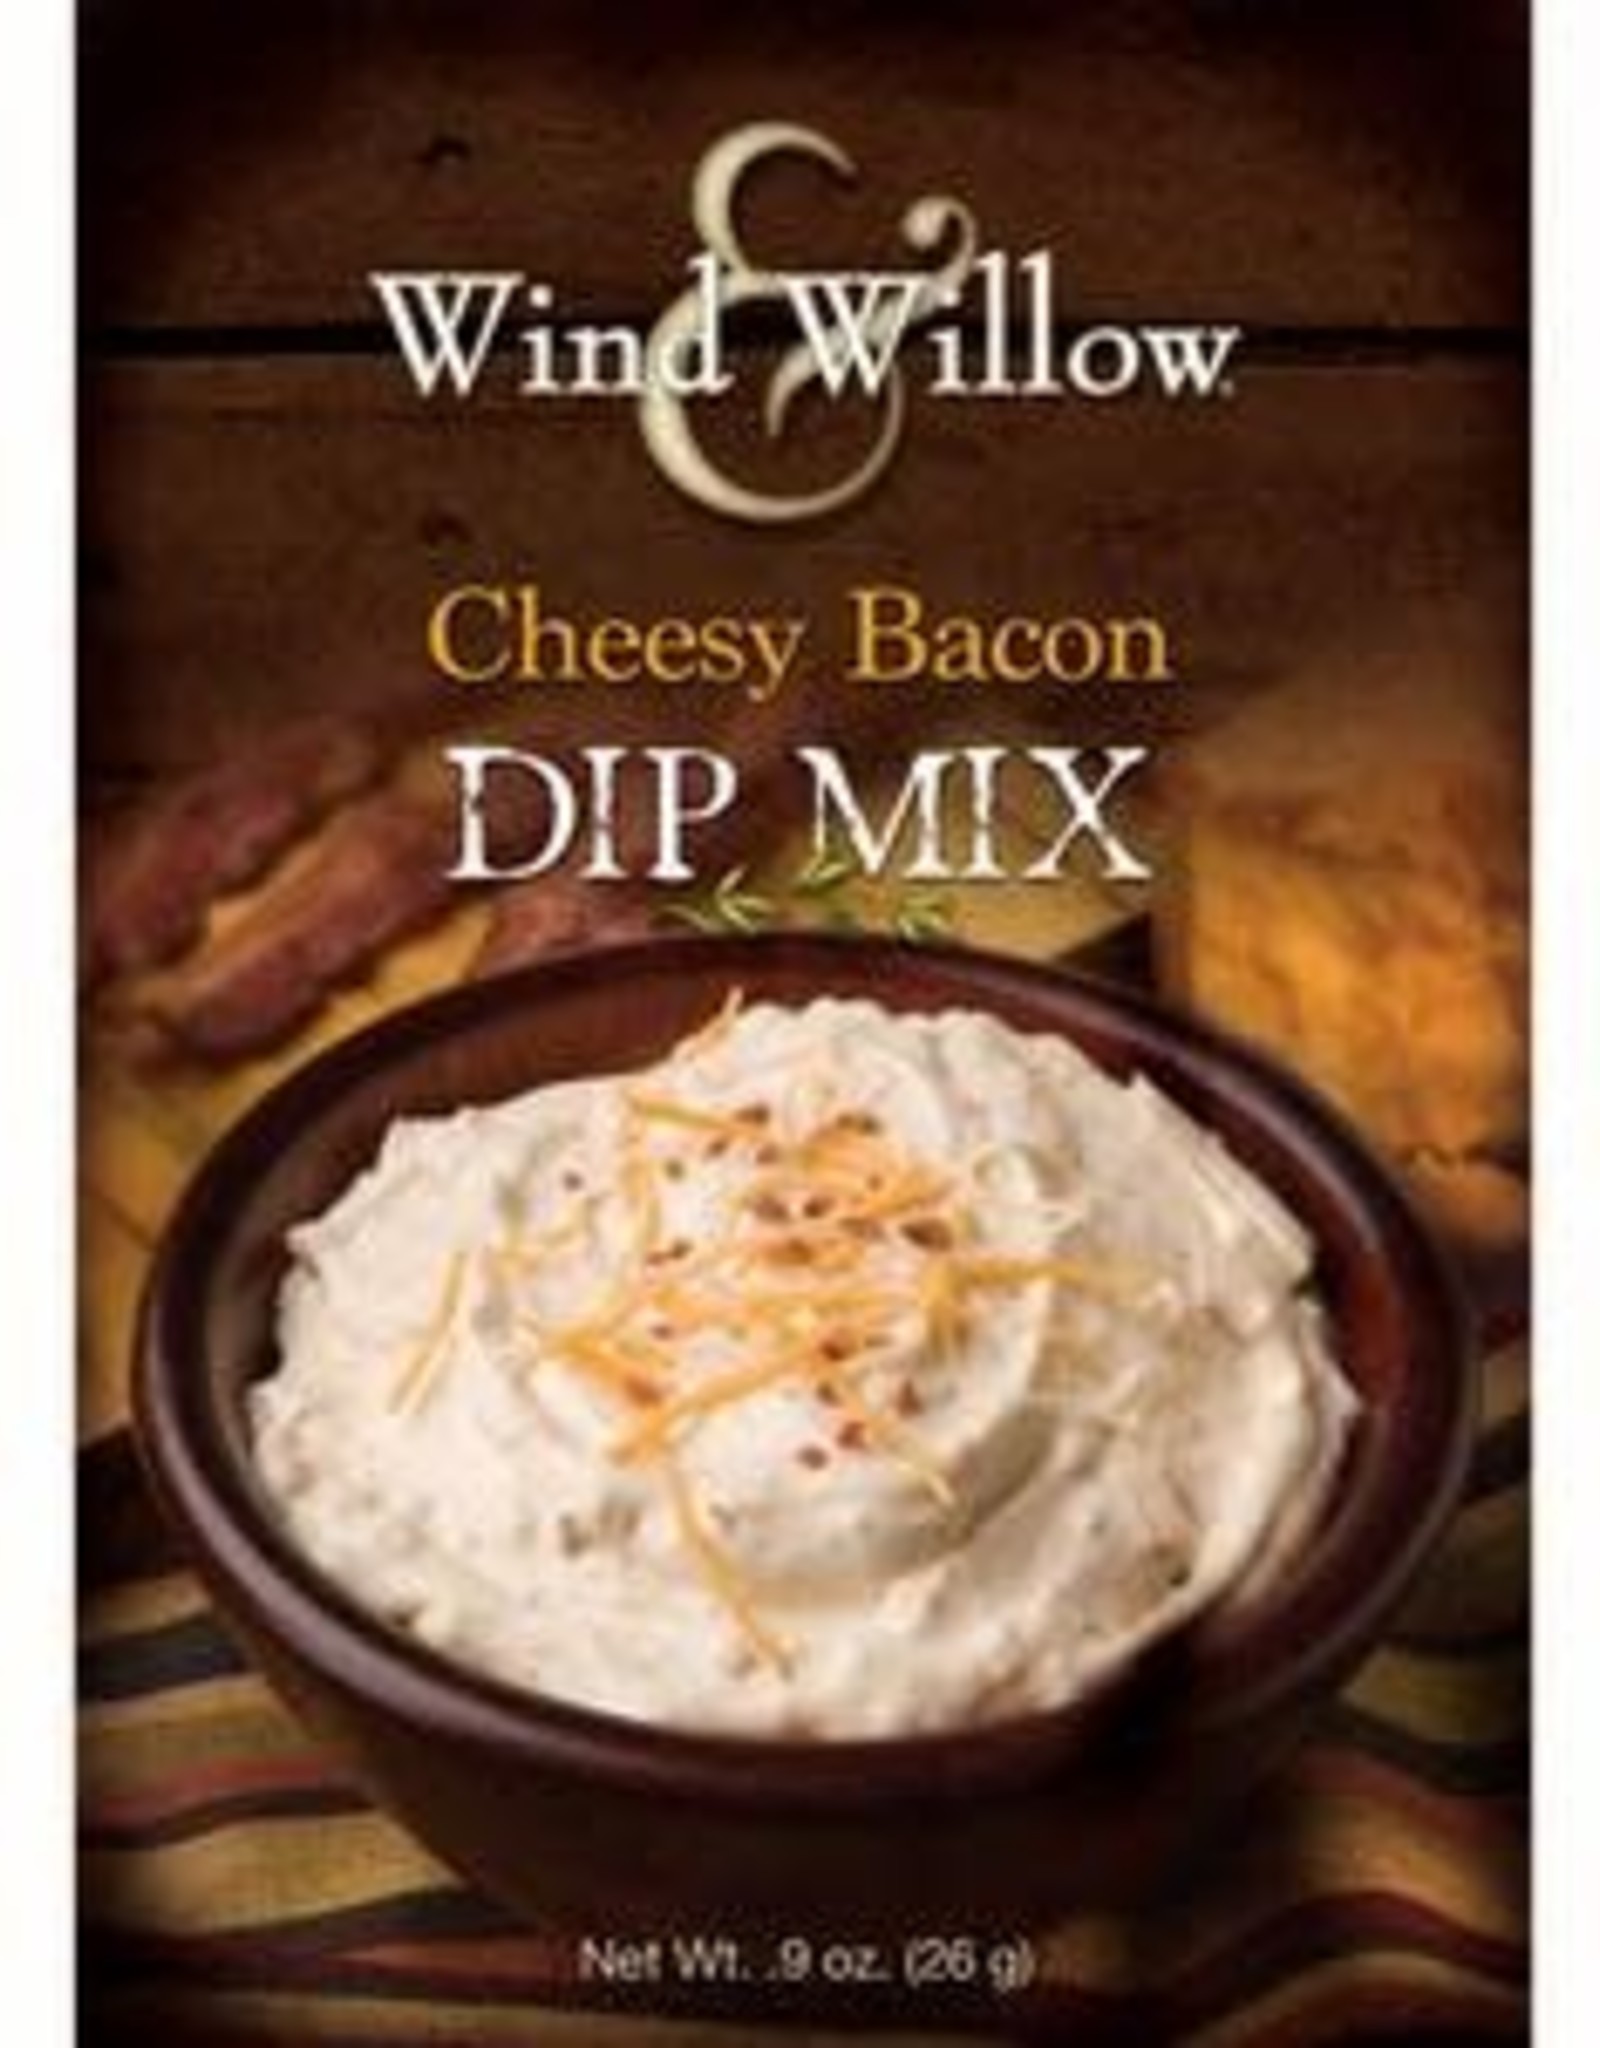 Wind & Willow Cheesy Bacon Dip Mix